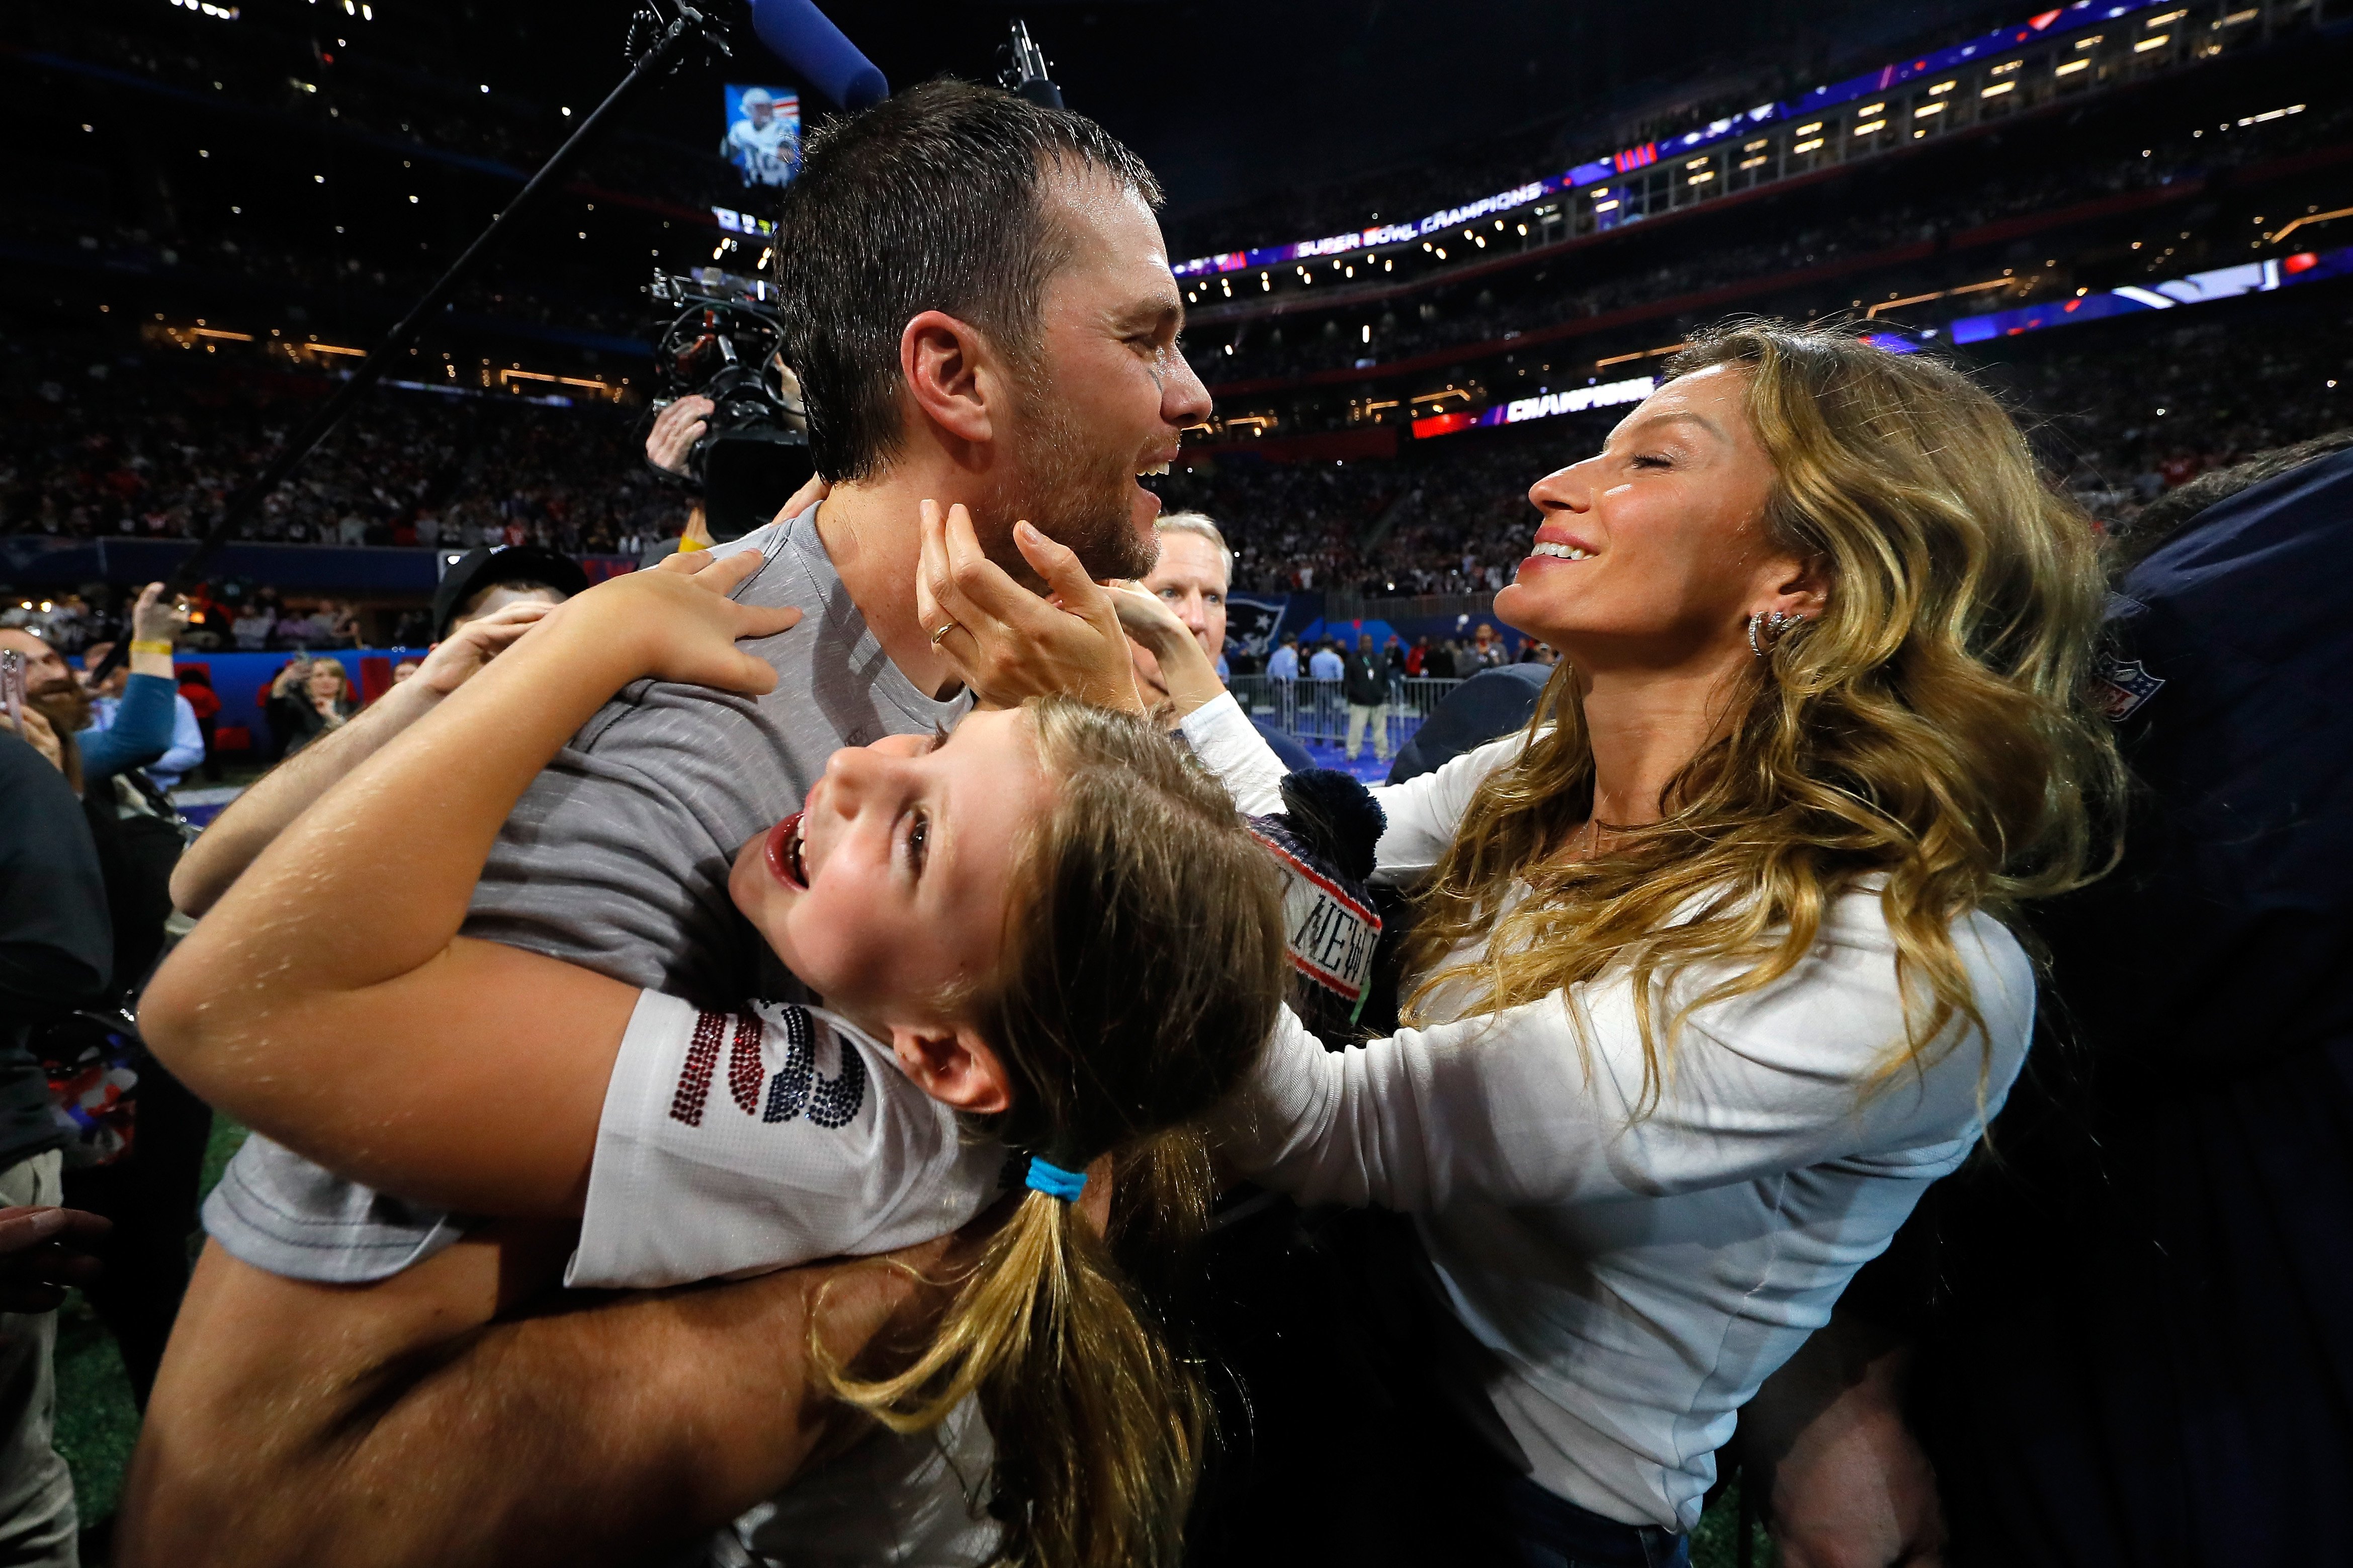 Tom Brady #12 of the New England Patriots celebrates with his wife Gisele Bündchen after the Super Bowl LIII against the Los Angeles Rams at Mercedes-Benz Stadium on February 3, 2019 in Atlanta, Georgia | Source: Getty Images 